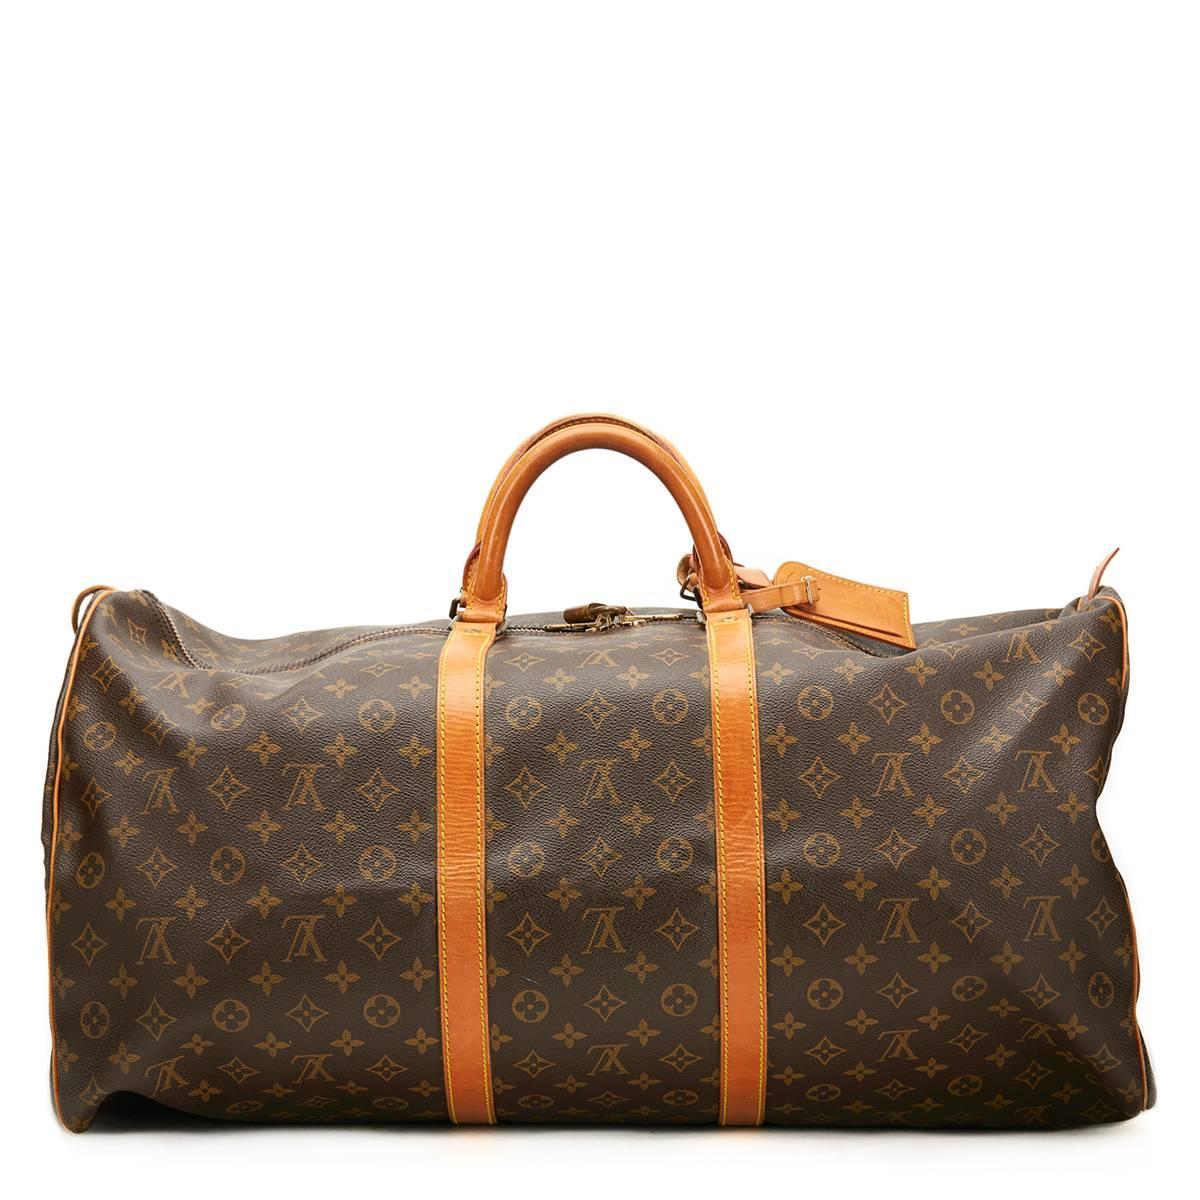 What Are Lv Classic Bags Made